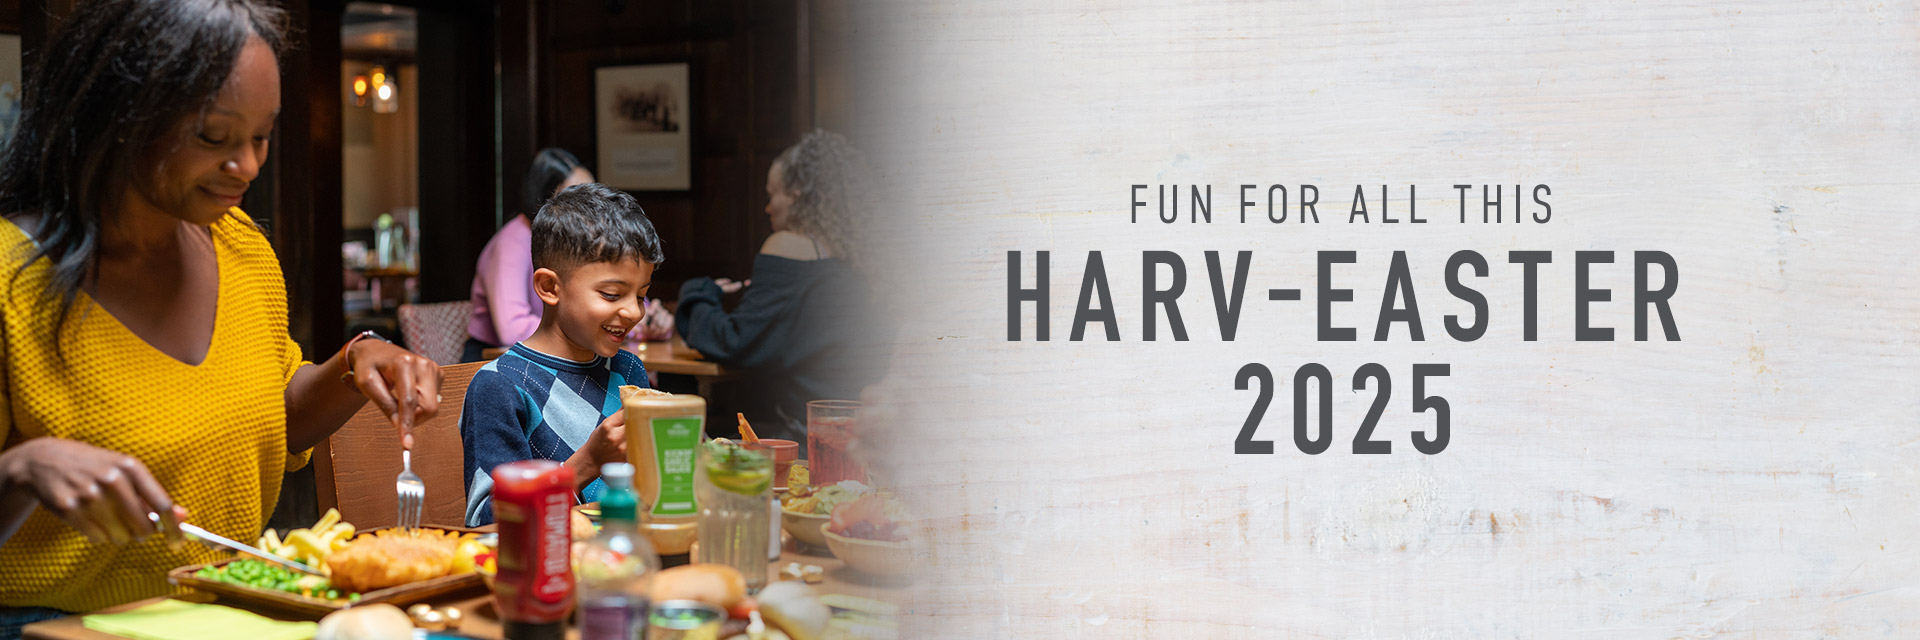 Easter at Harvester Meridian Park in Leicester 2025